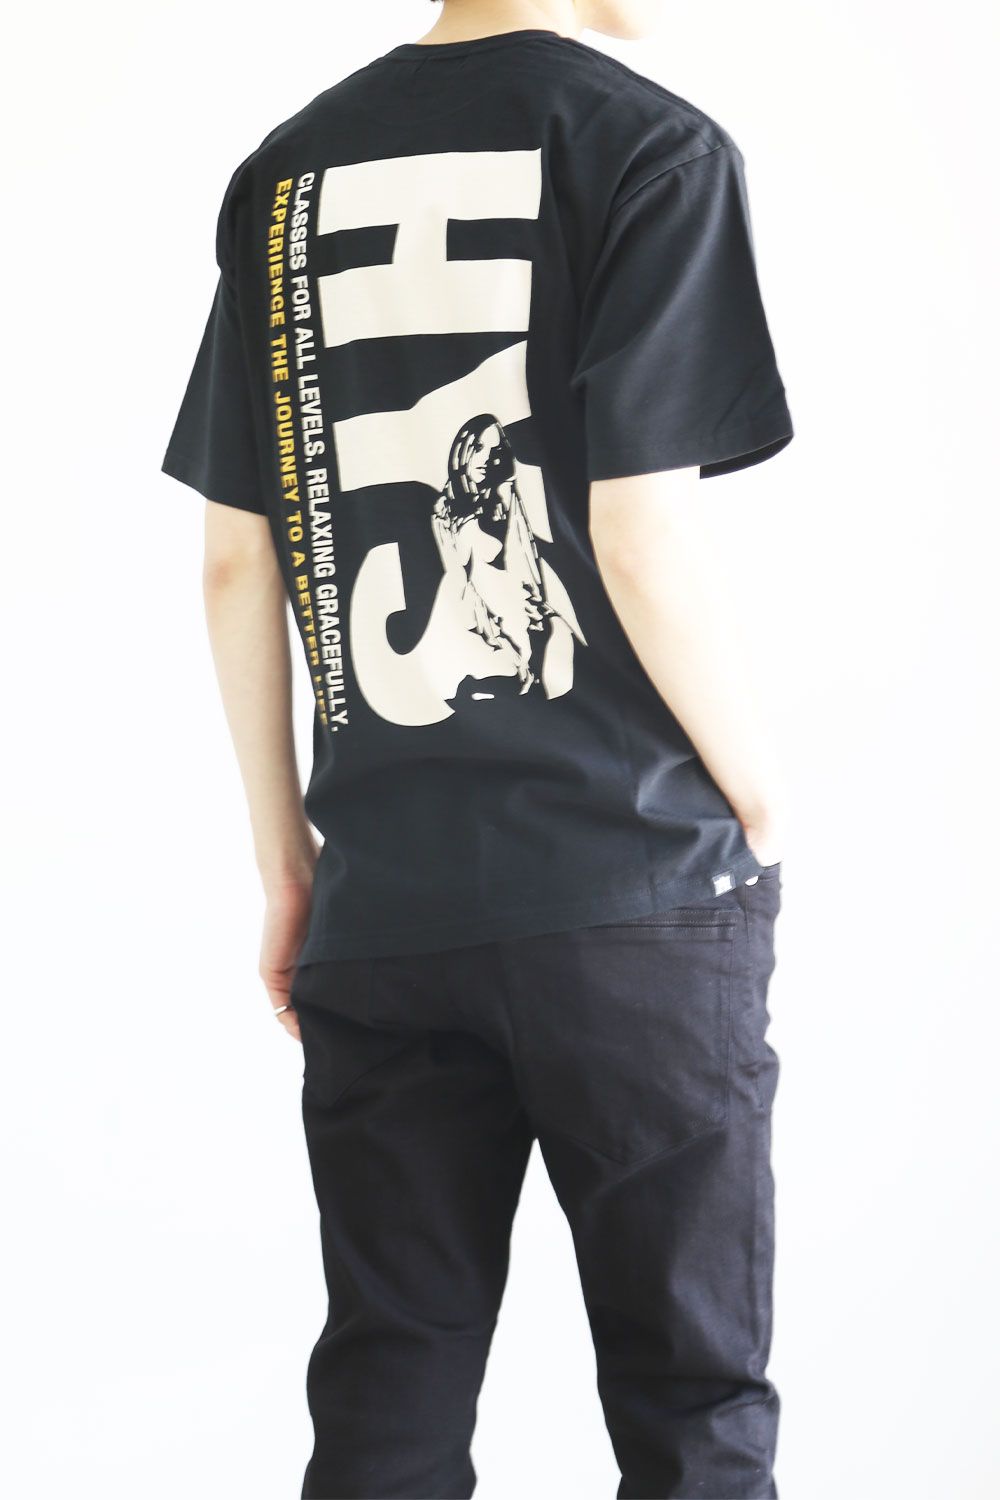 HYSTERIC GLAMOUR - HYS EXPERIENCE Tシャツ / ブラック 